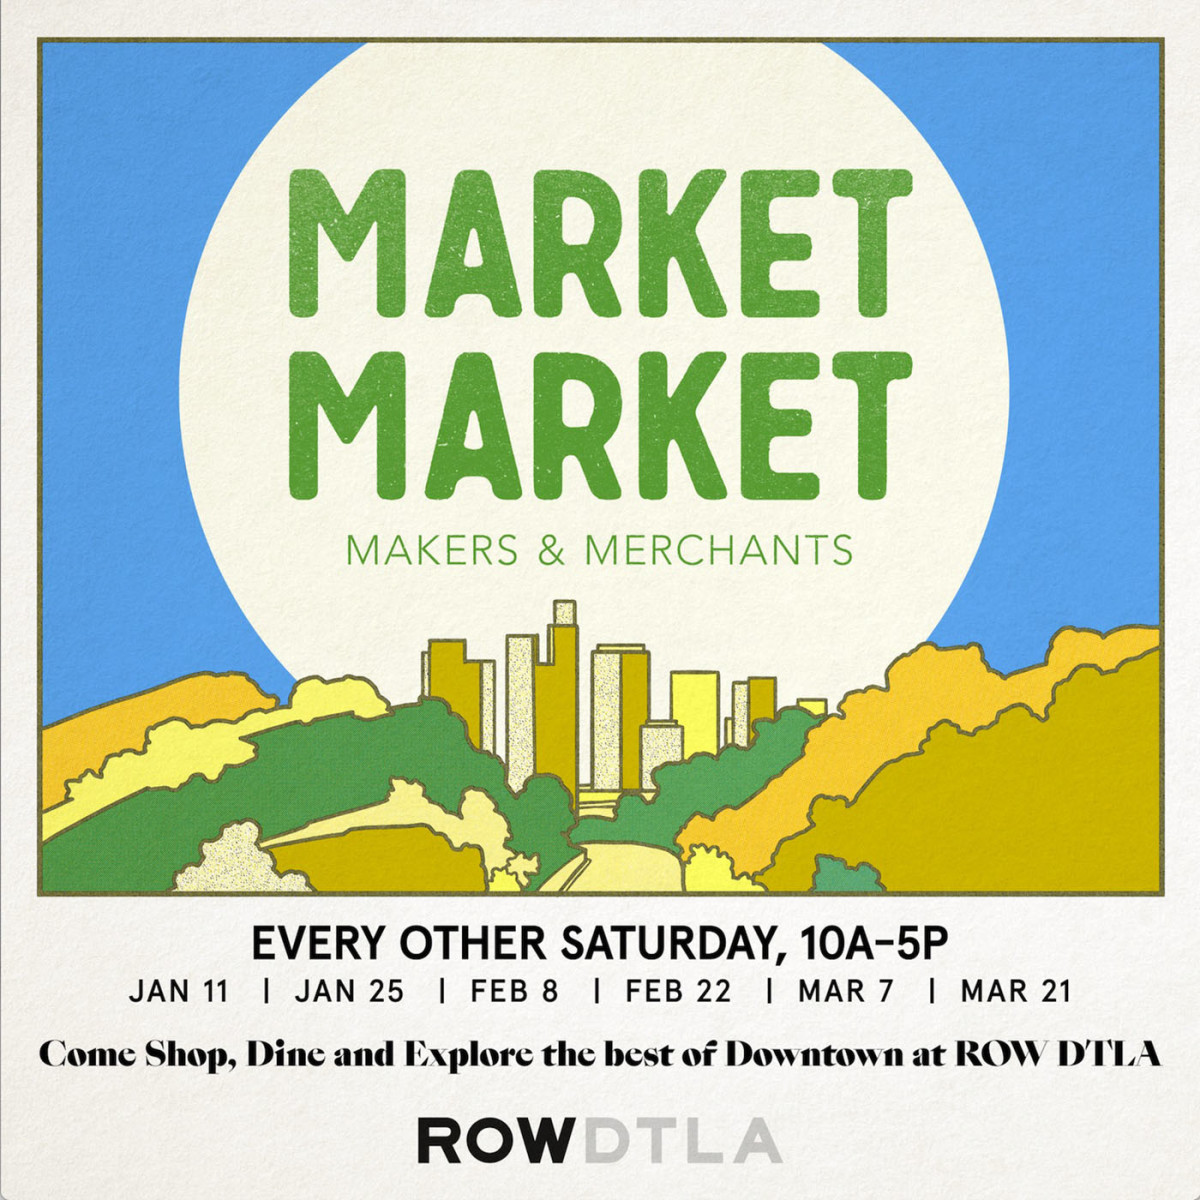 Poster for Market Market showing an illustration of Downtown LA